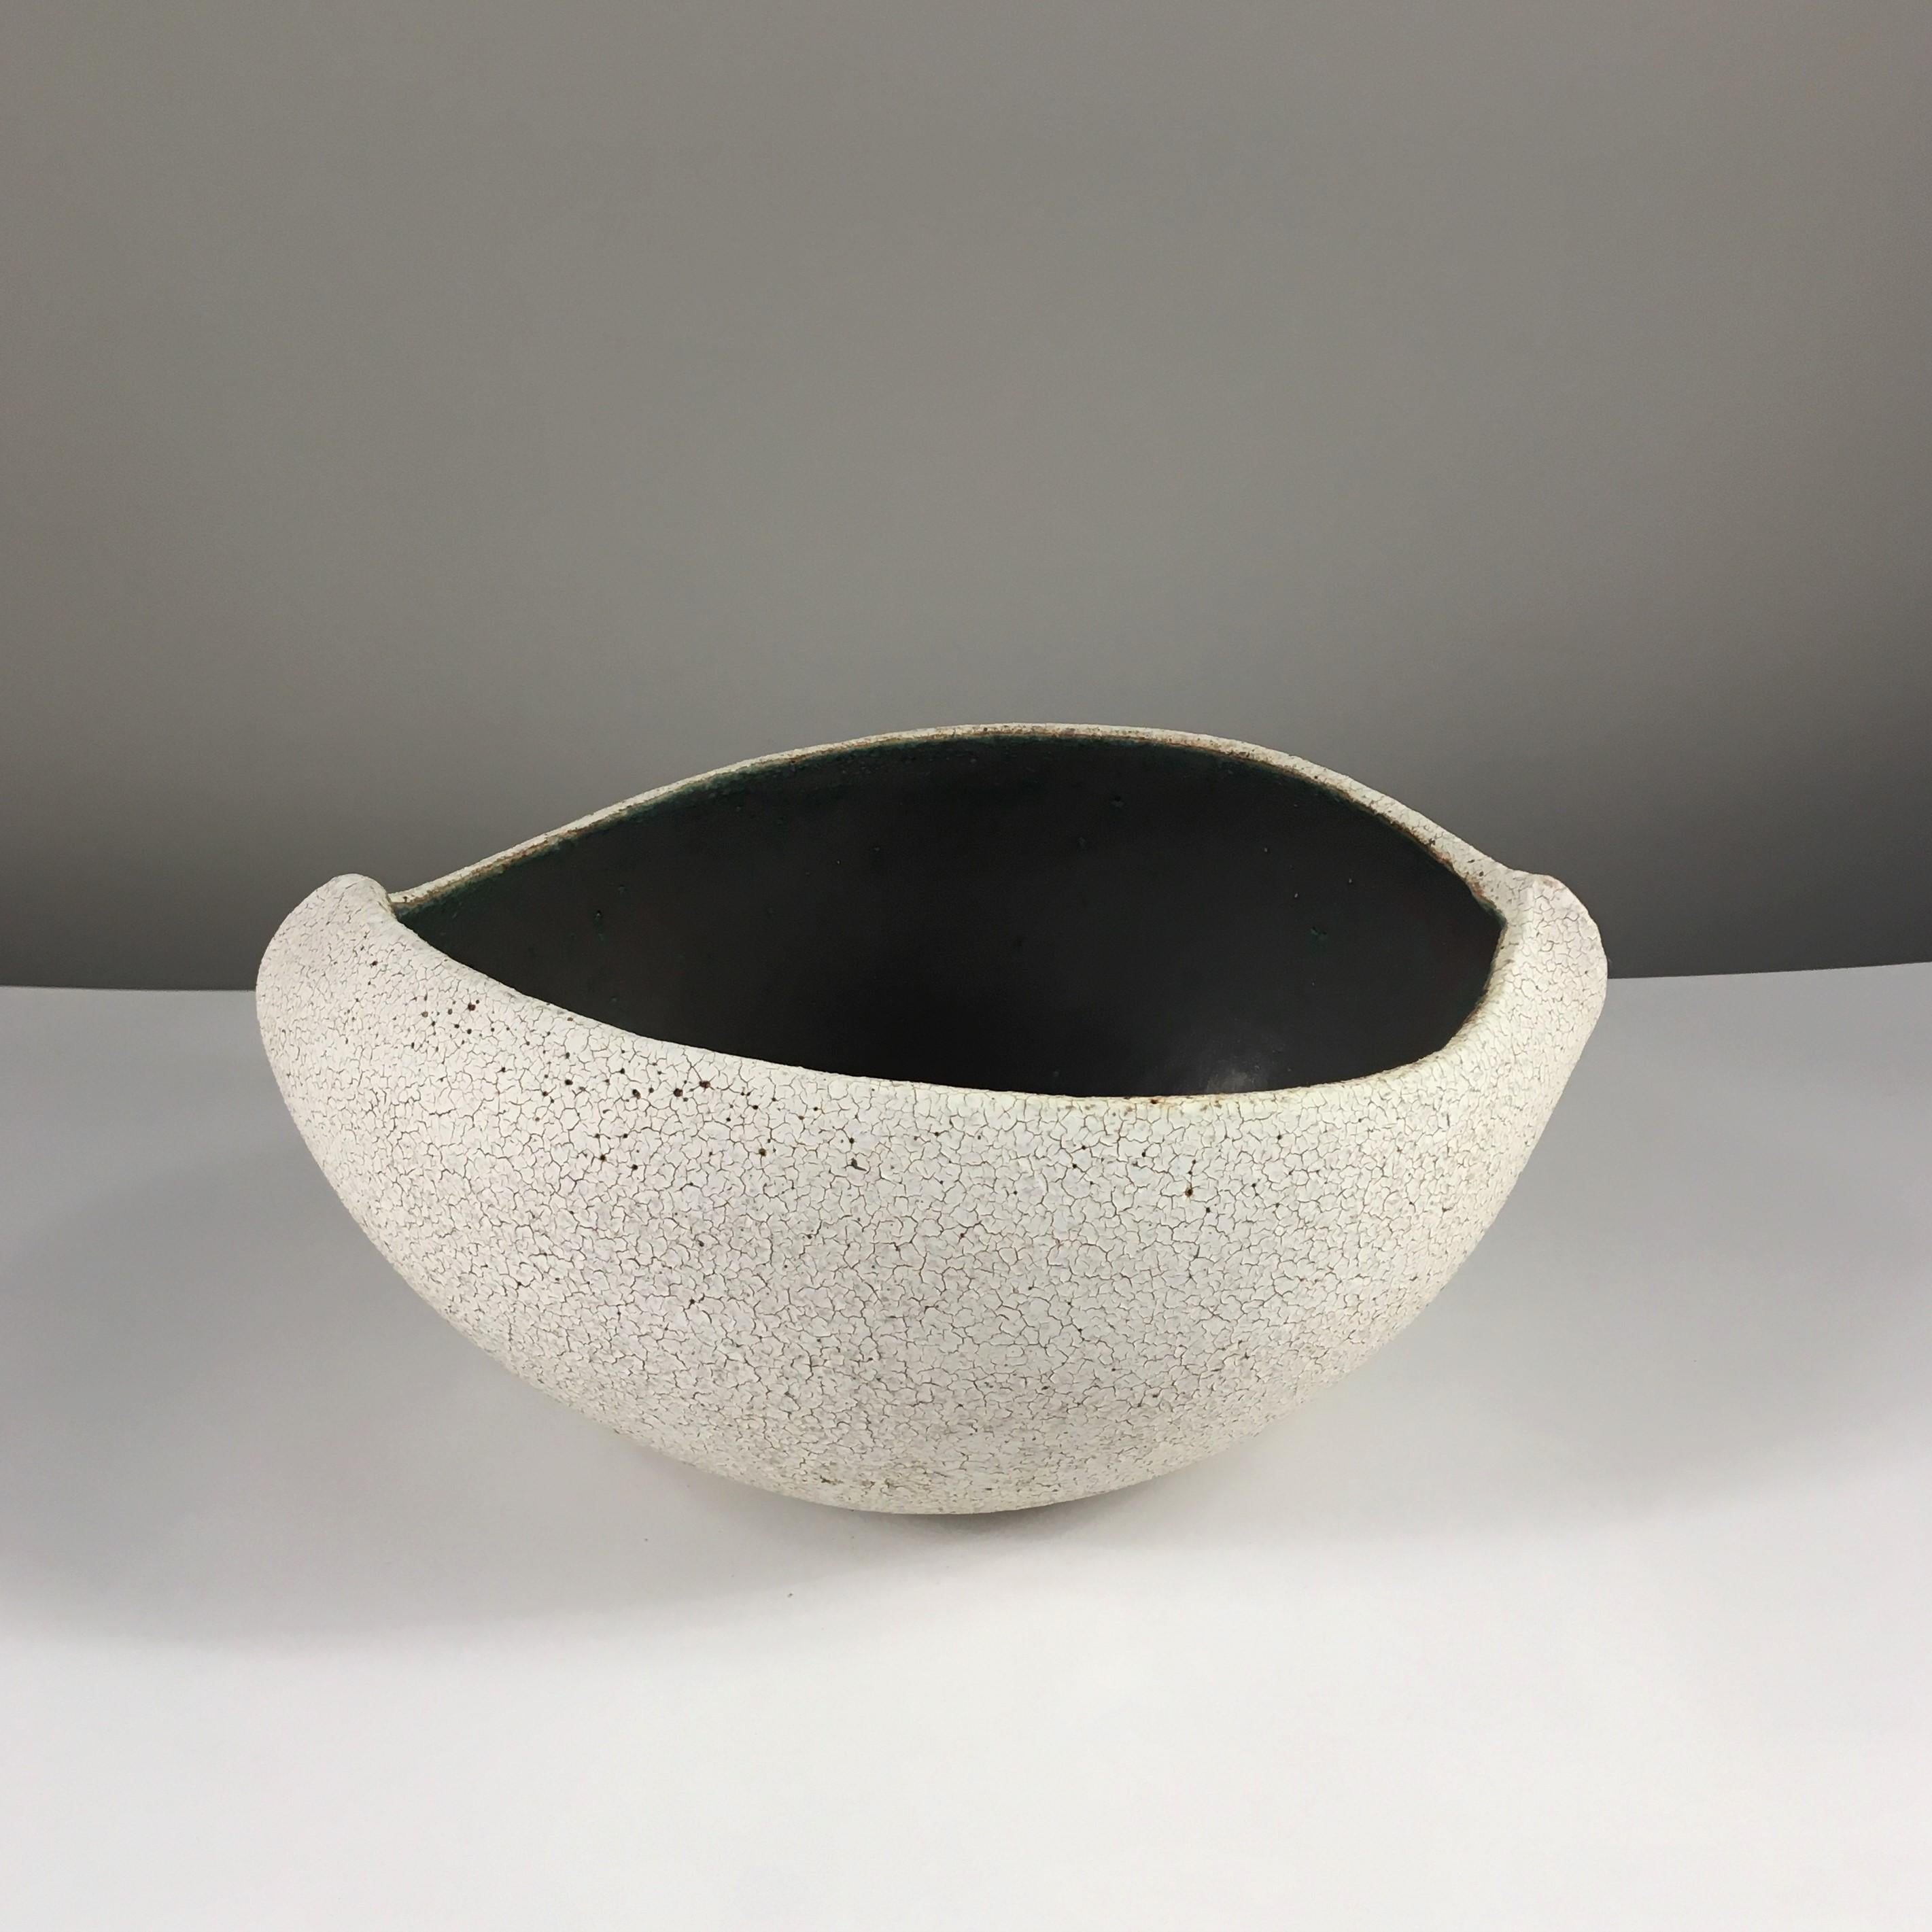 Boat Shaped Bowl with Dark Inner Glaze by Yumiko Kuga. Dimensions: W 11